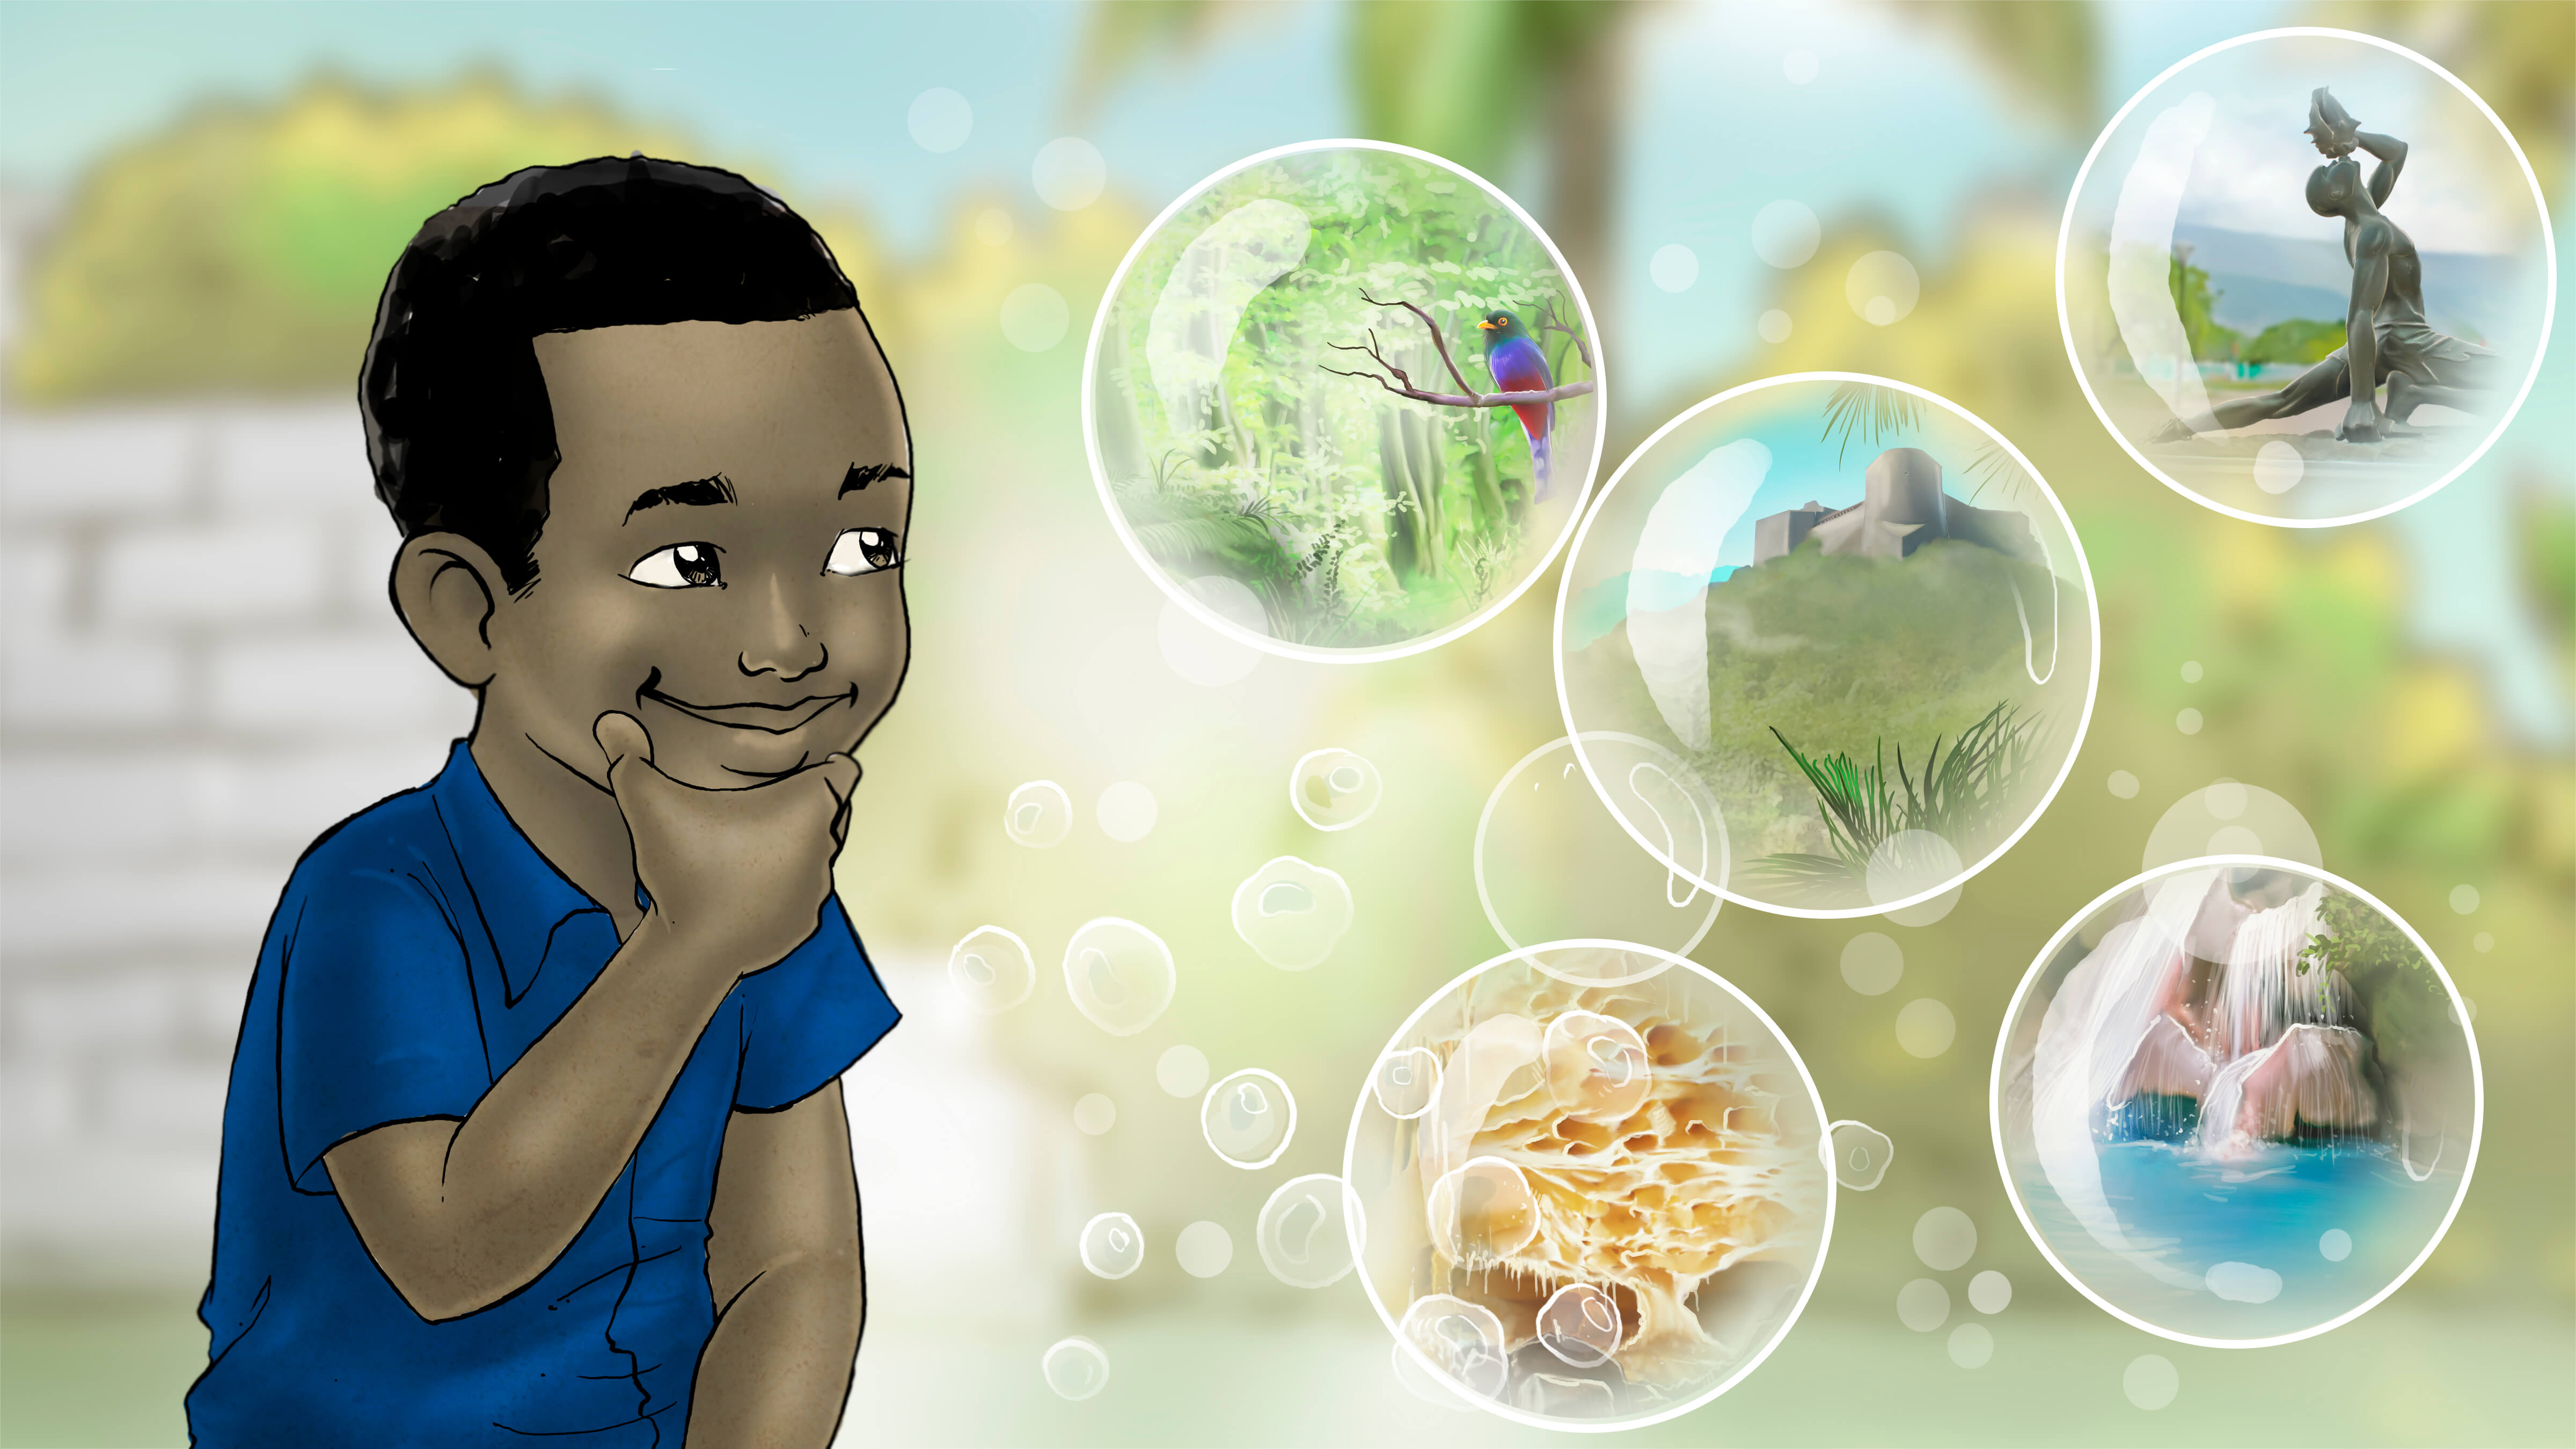 Illustration of boy watching bubbles float while doing laundry. Bubbles have images of famous landmarks in Haiti inside of them.